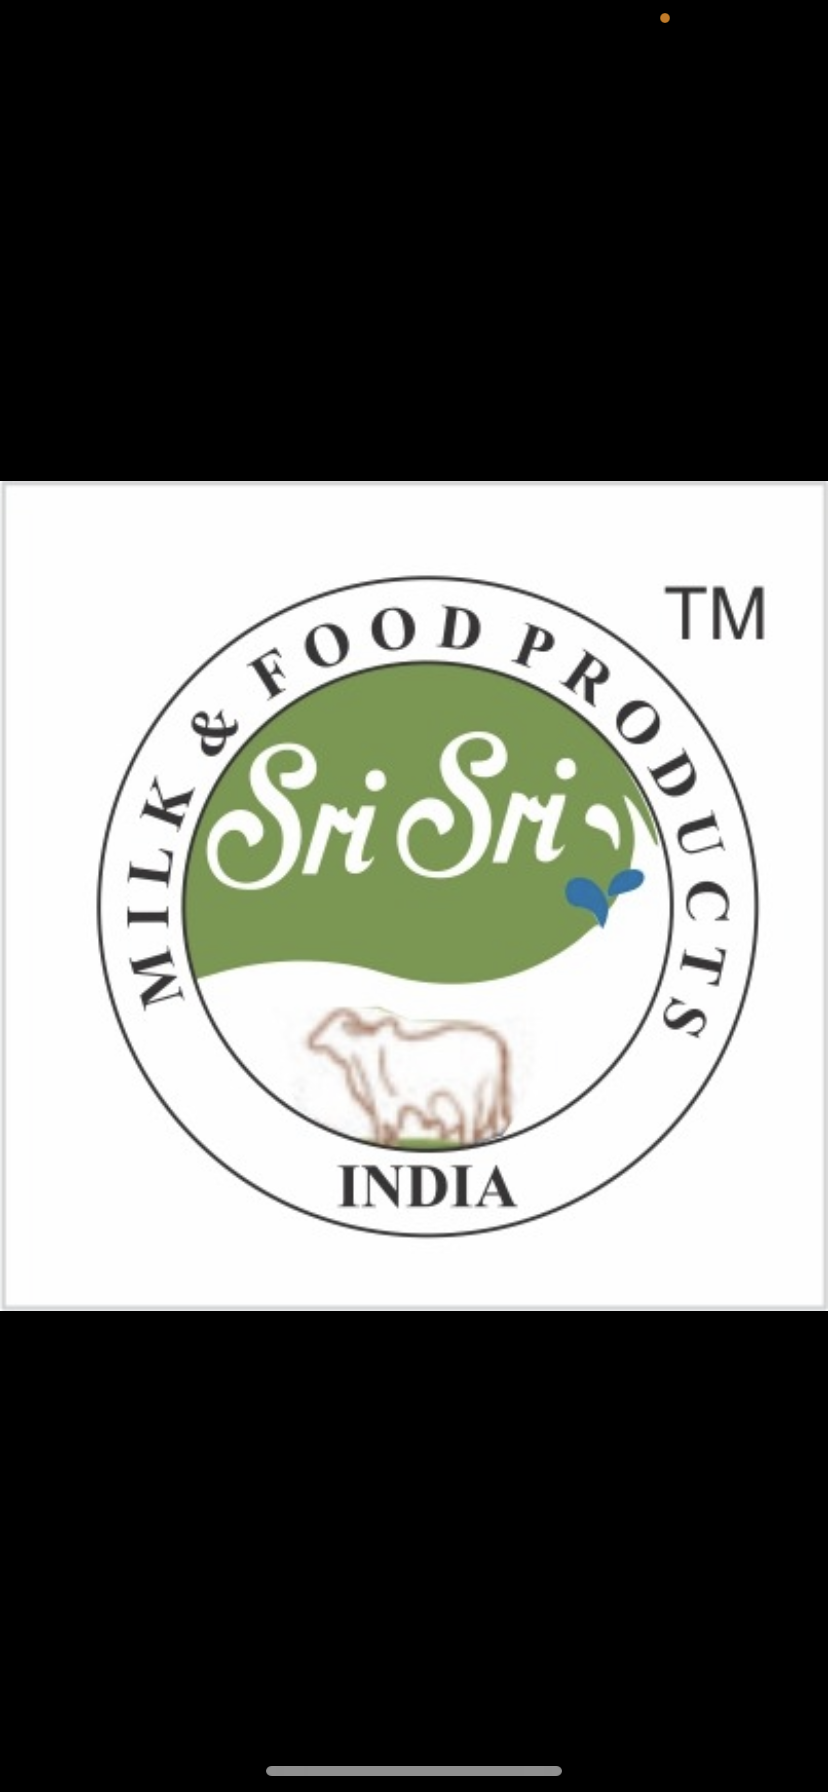 https://salesprofessionals.co.in/company/sri-sri-milk-and-food-products